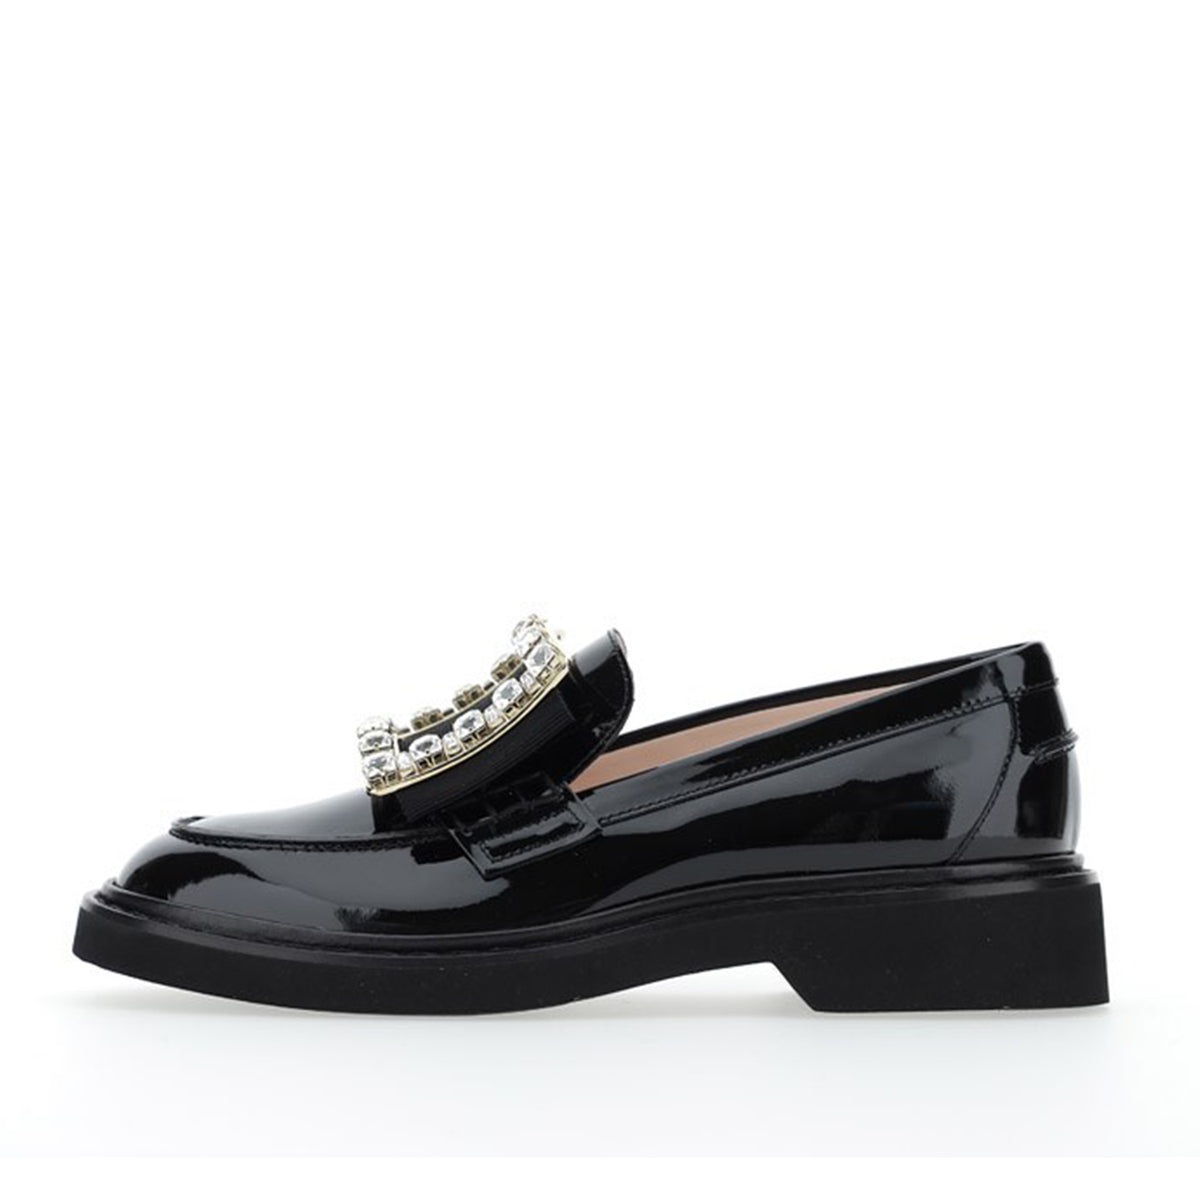 Viv' Rangers Strass Buckle Loafers